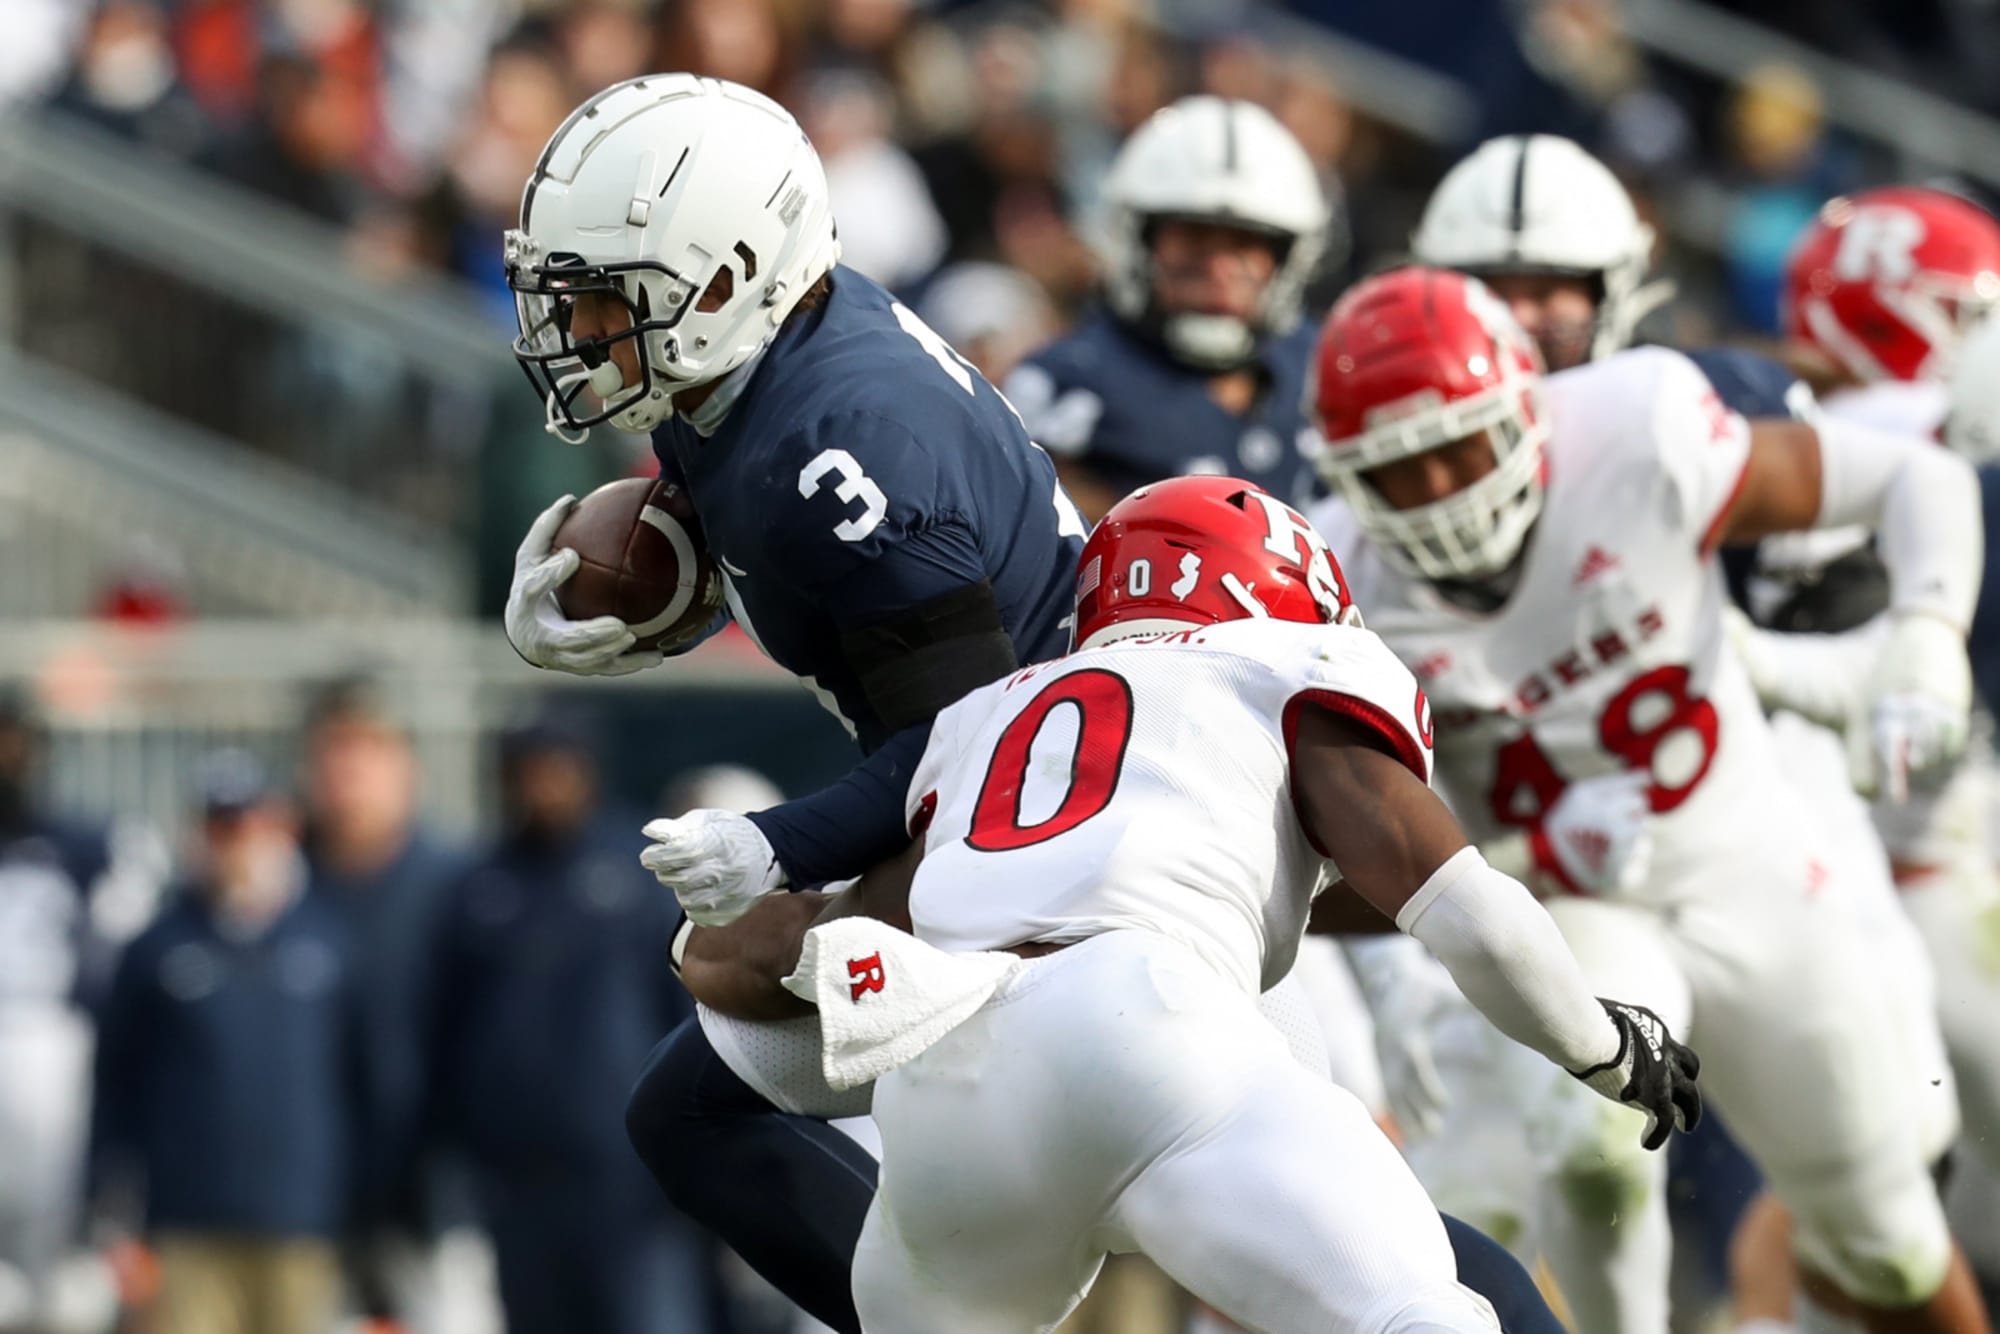 Penn State football bowl projections after beating Rutgers